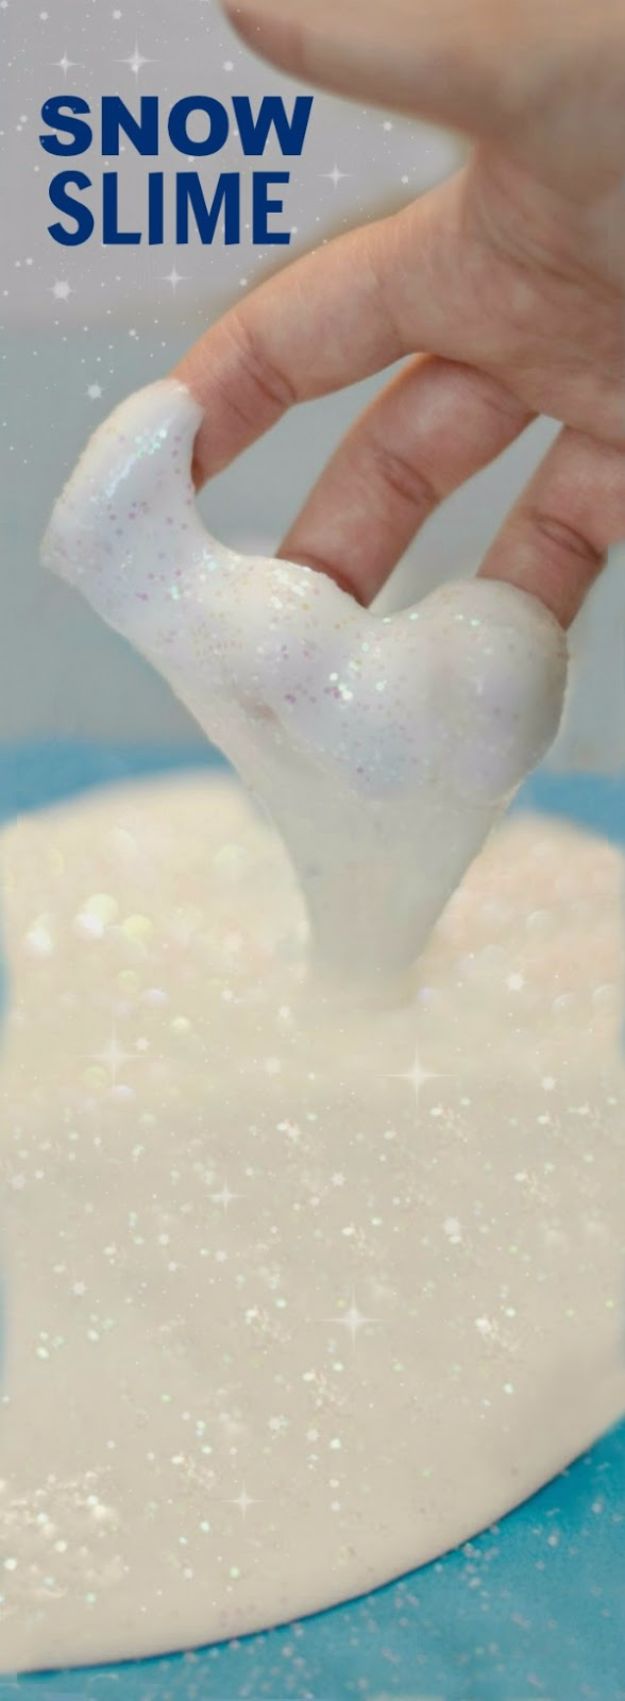 Best DIY Slime Recipes - Snow Slime - Cool and Easy Slime Recipe and Tutorials - Ideas Without Glue, Without Borax, For Kids, With Liquid Starch, Cornstarch and Laundry Detergent - How to Make Slime at Home - Fun Crafts and DIY Projects for Teens, Kids, Teenagers and Teens - Galaxy and Glitter Slime, Edible Slime, Rainbow Colored Slime, Shaving Cream recipes and more fun crafts and slimes #slimerecipes #slime #diyslime #teencrafts